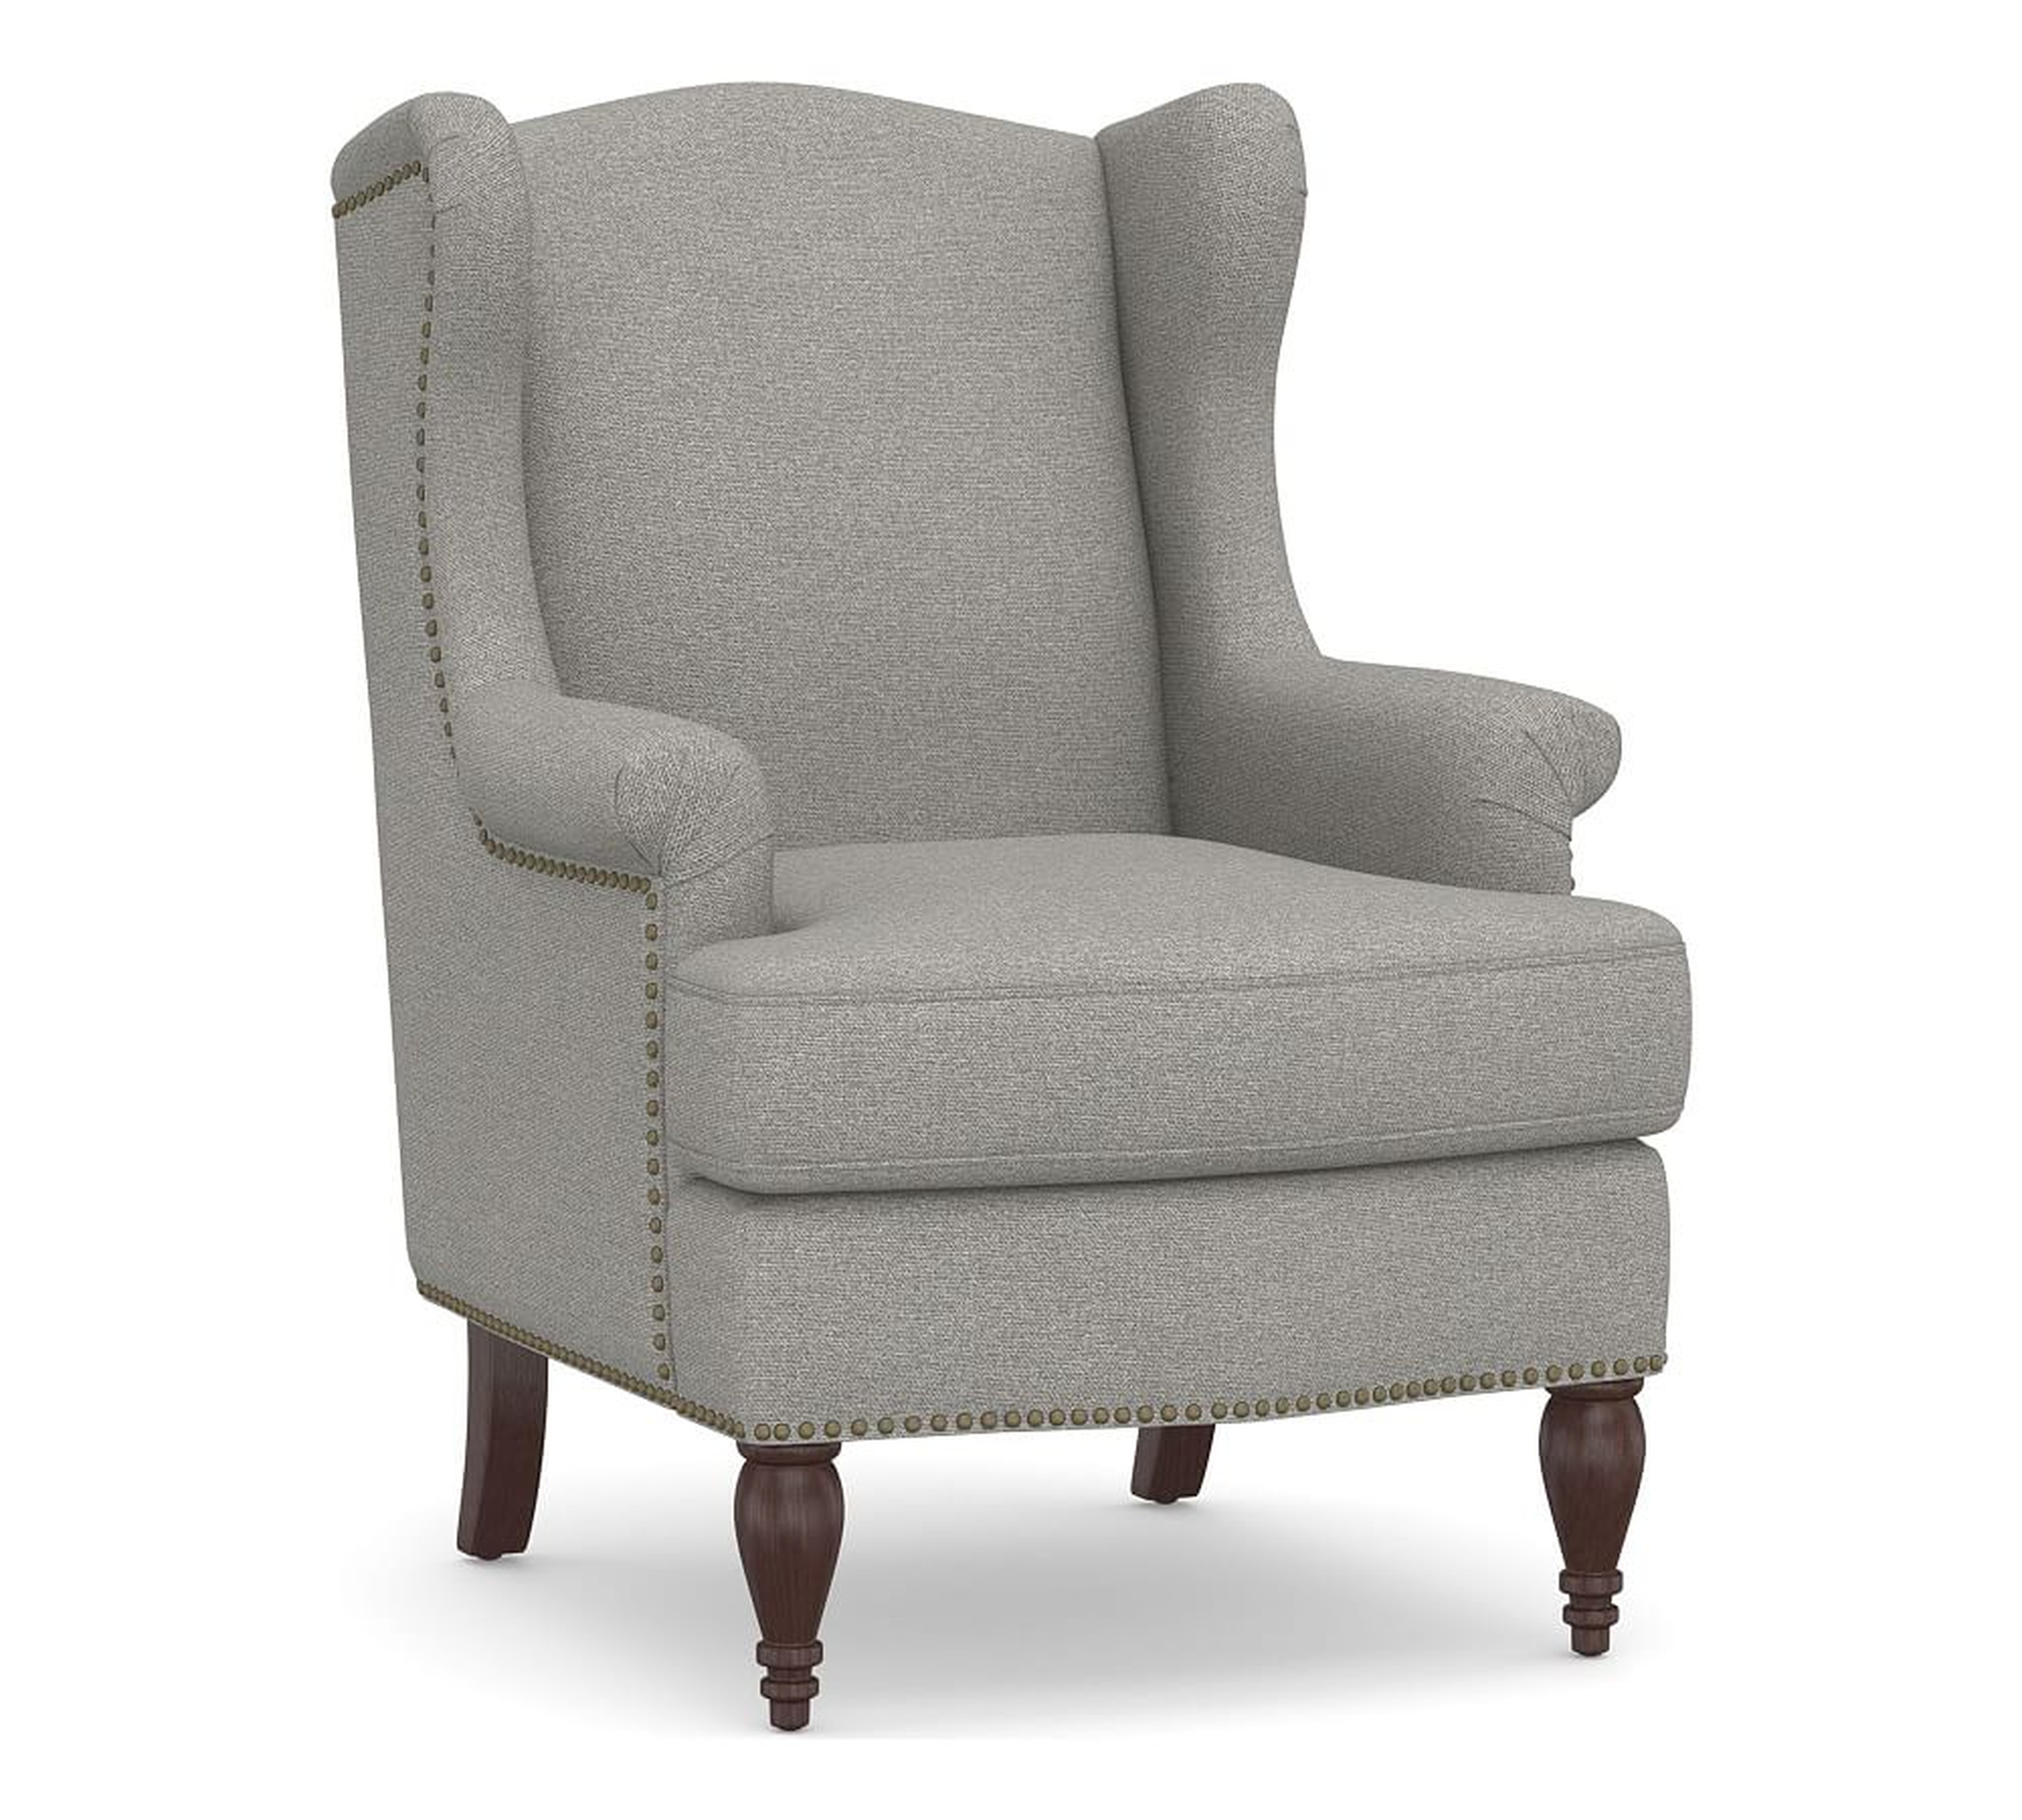 SoMa Delancey Upholstered Wingback Armchair, Polyester Wrapped Cushions, Performance Heathered Basketweave Platinum - Pottery Barn